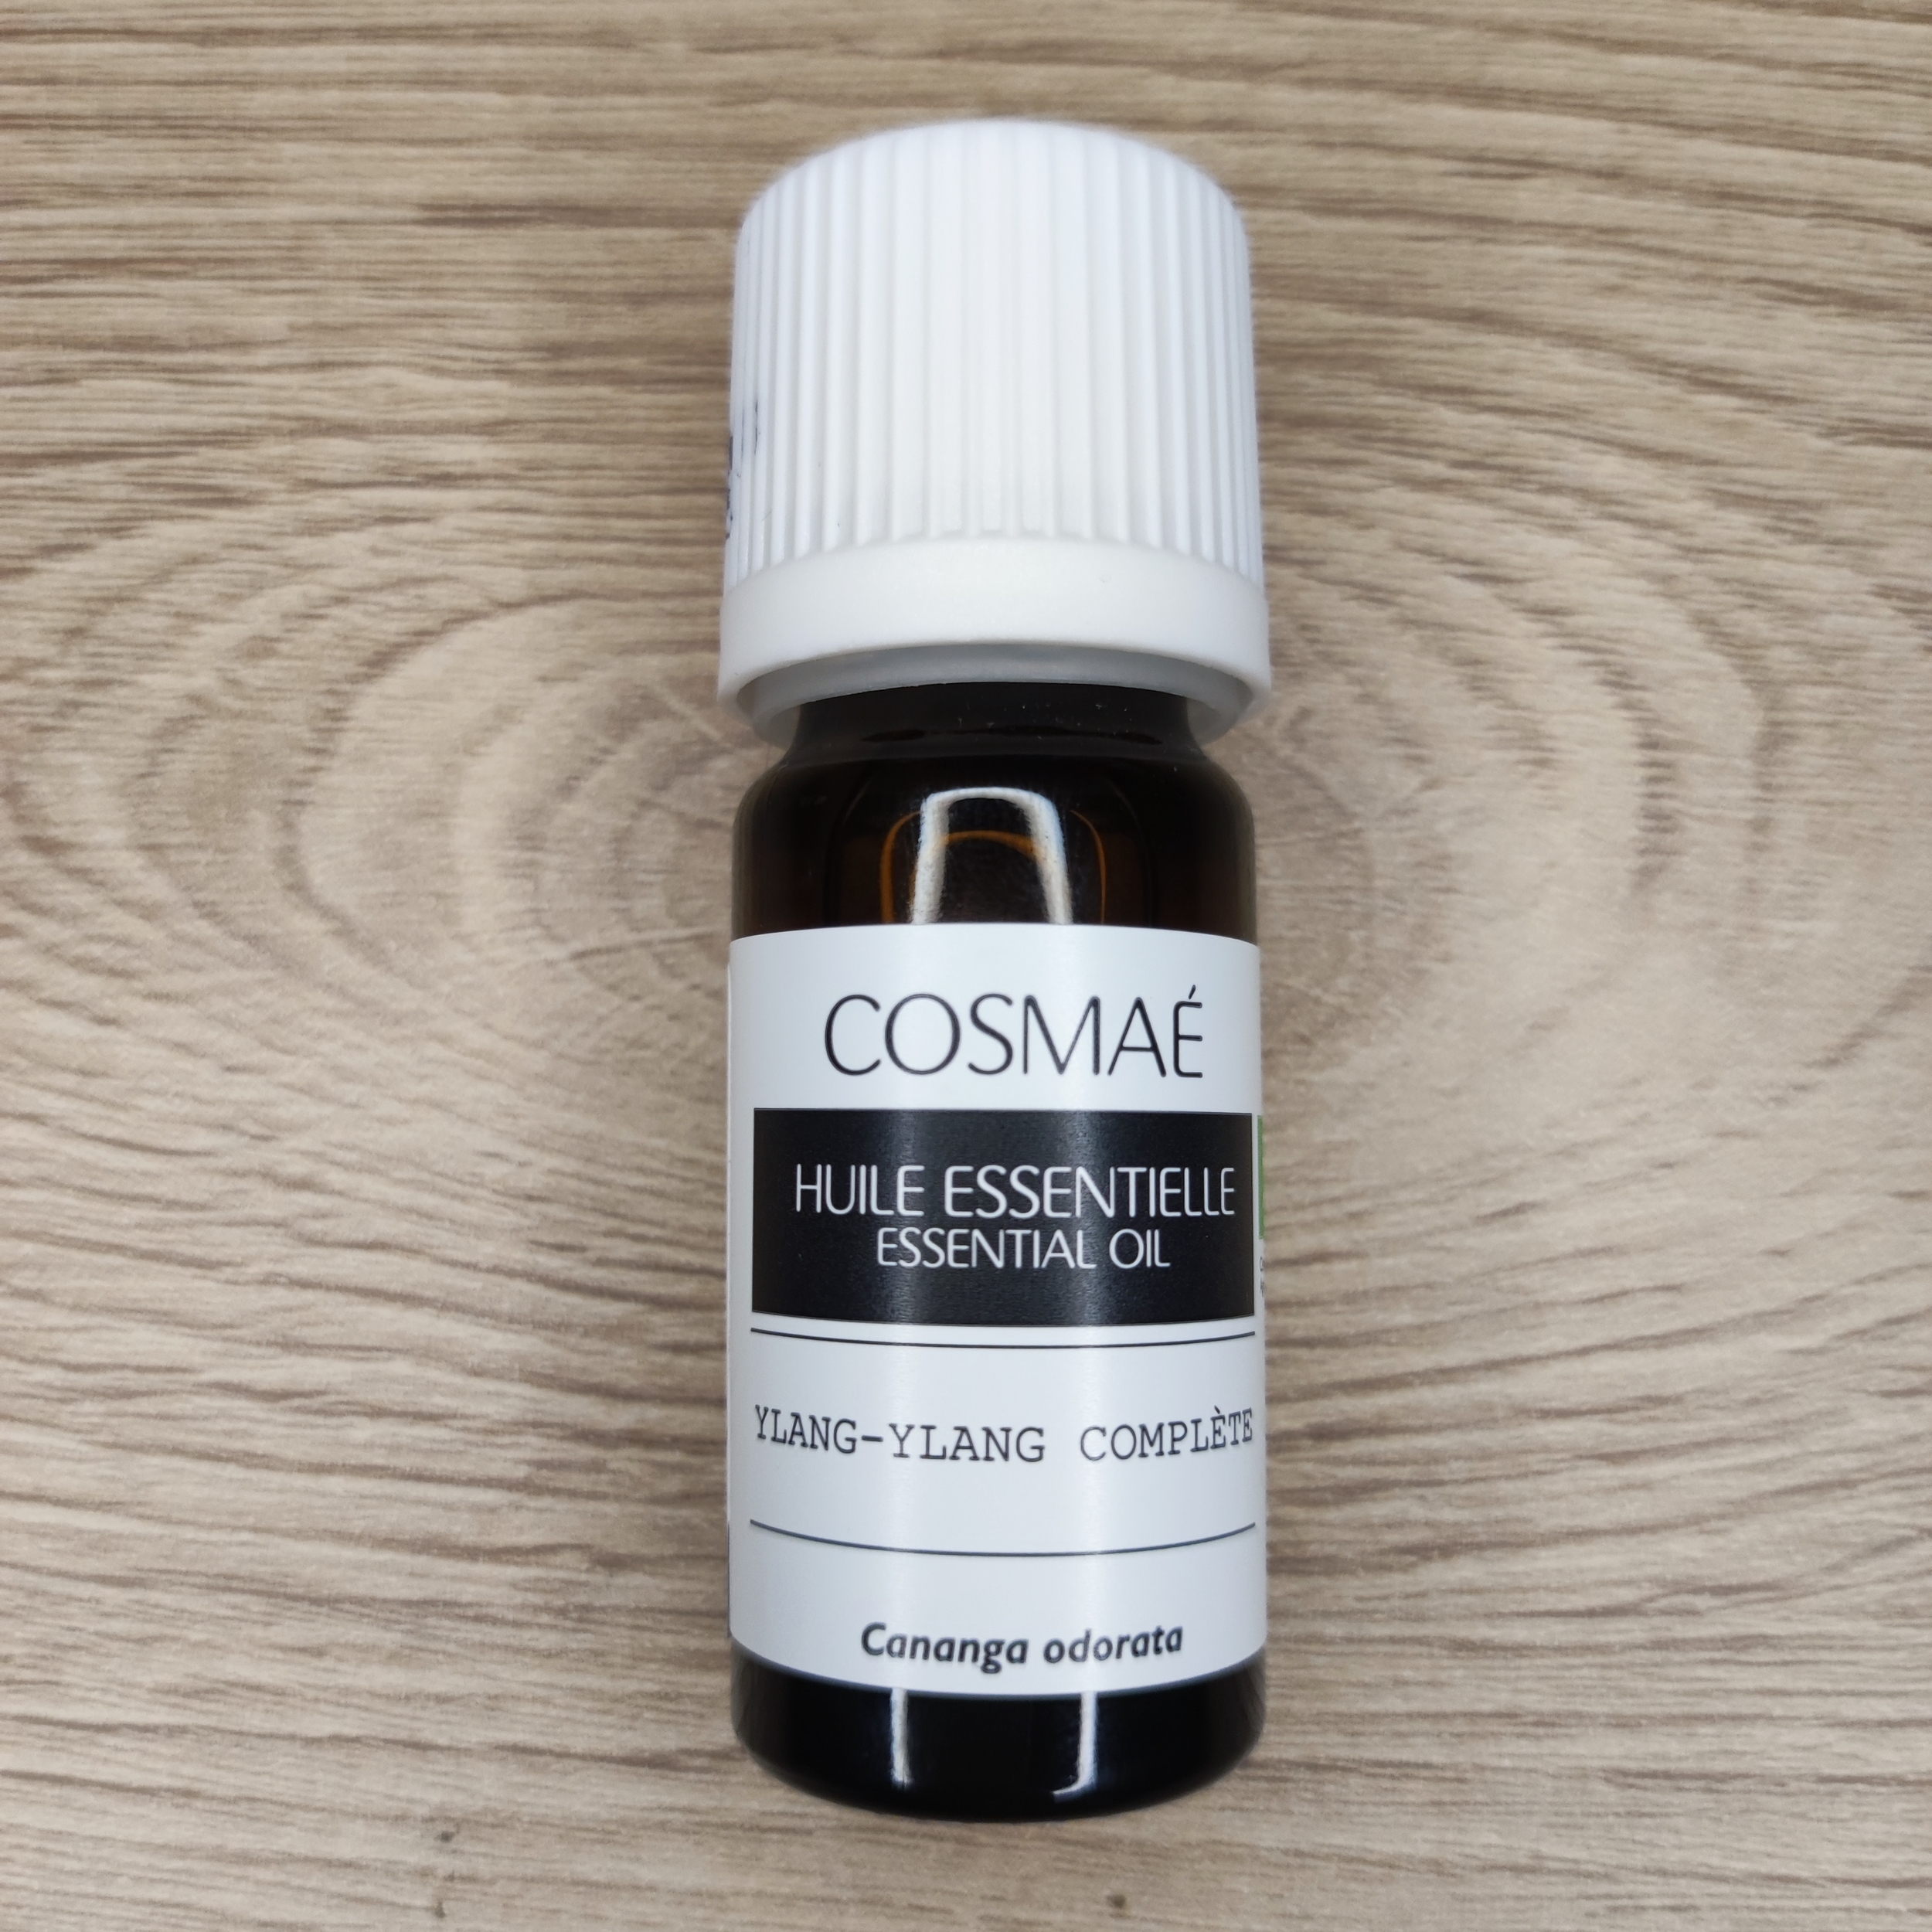 Huile essentielle - ylang-ylang complète